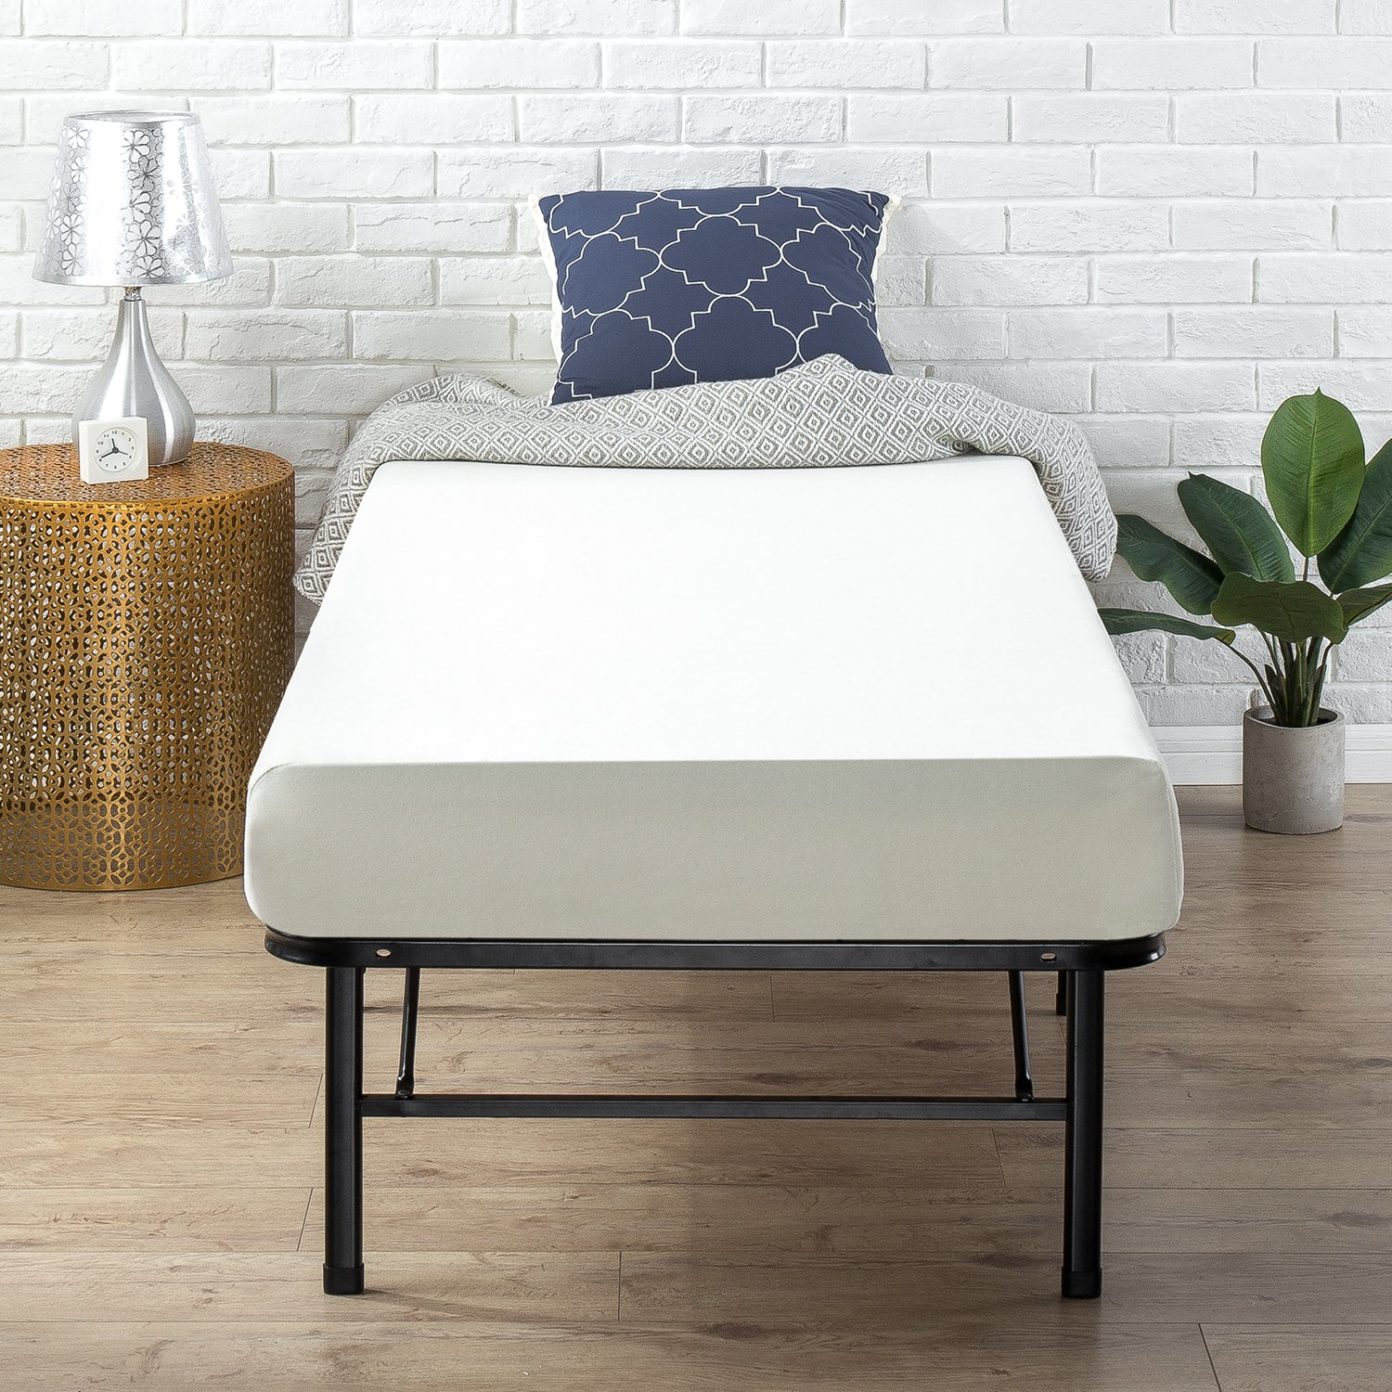 Best Soft Twin Mattress Review And Buying Guide